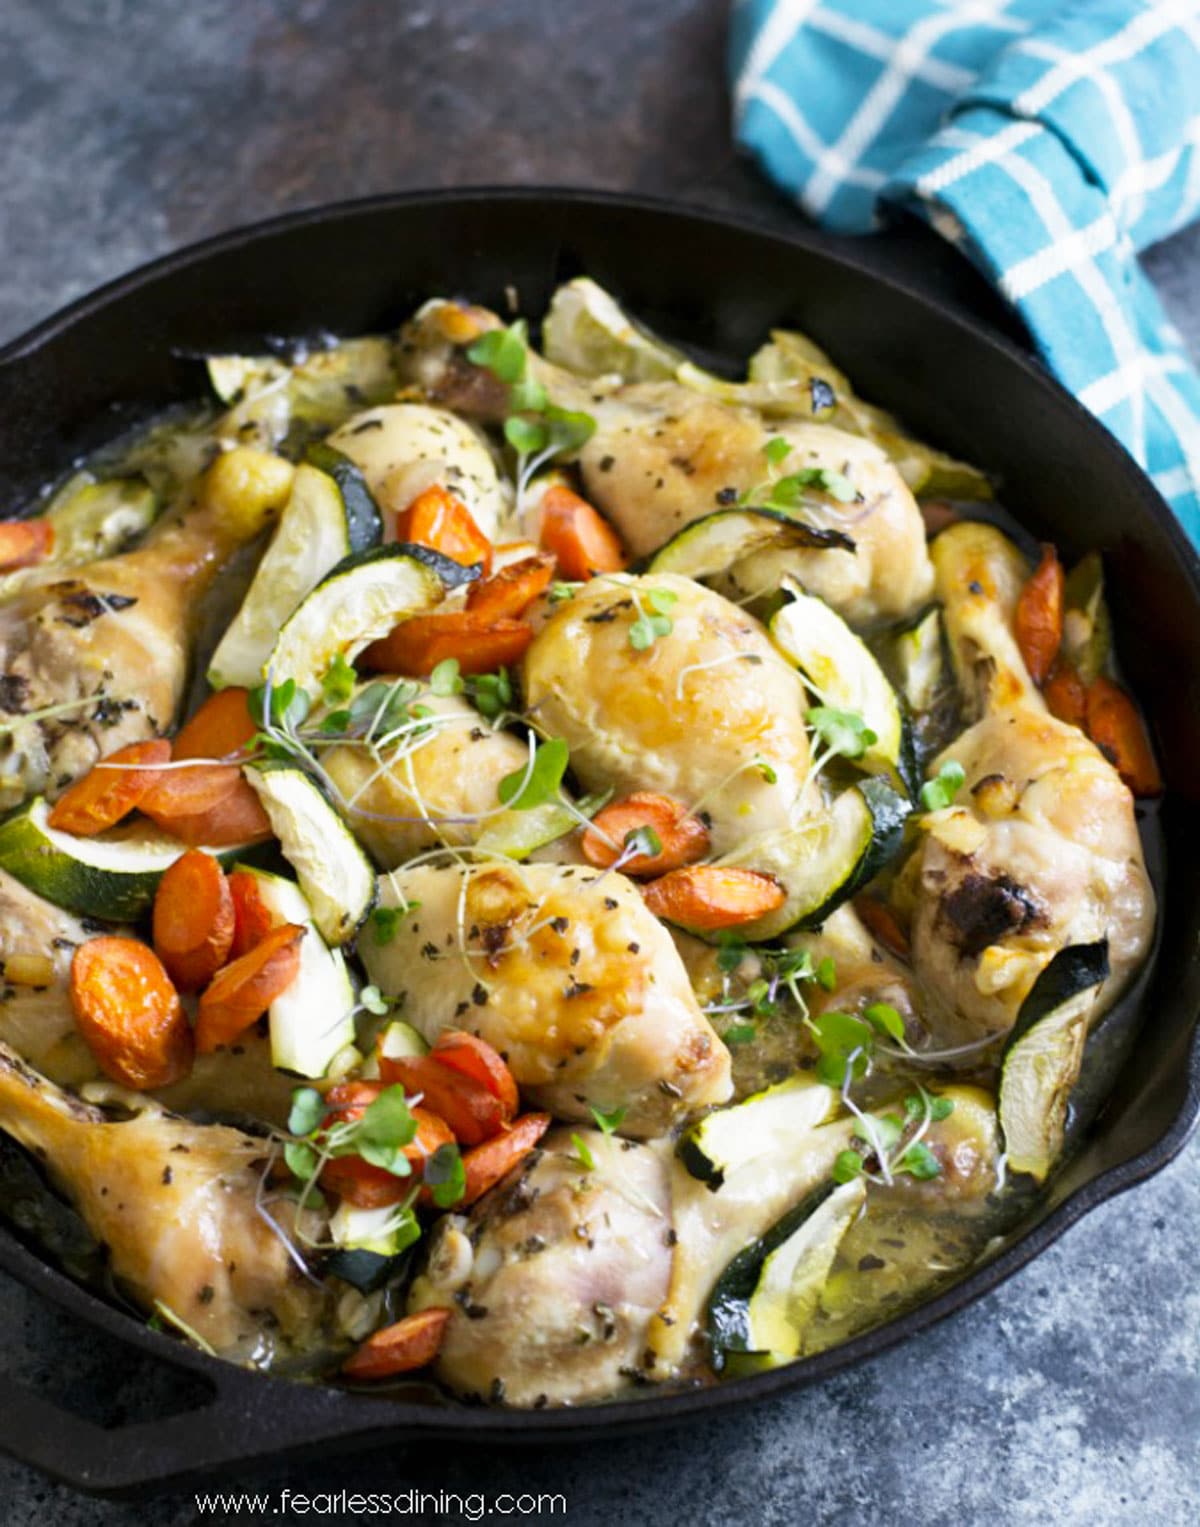 Acast iron skillet with cooked chicken legs and vegetables.